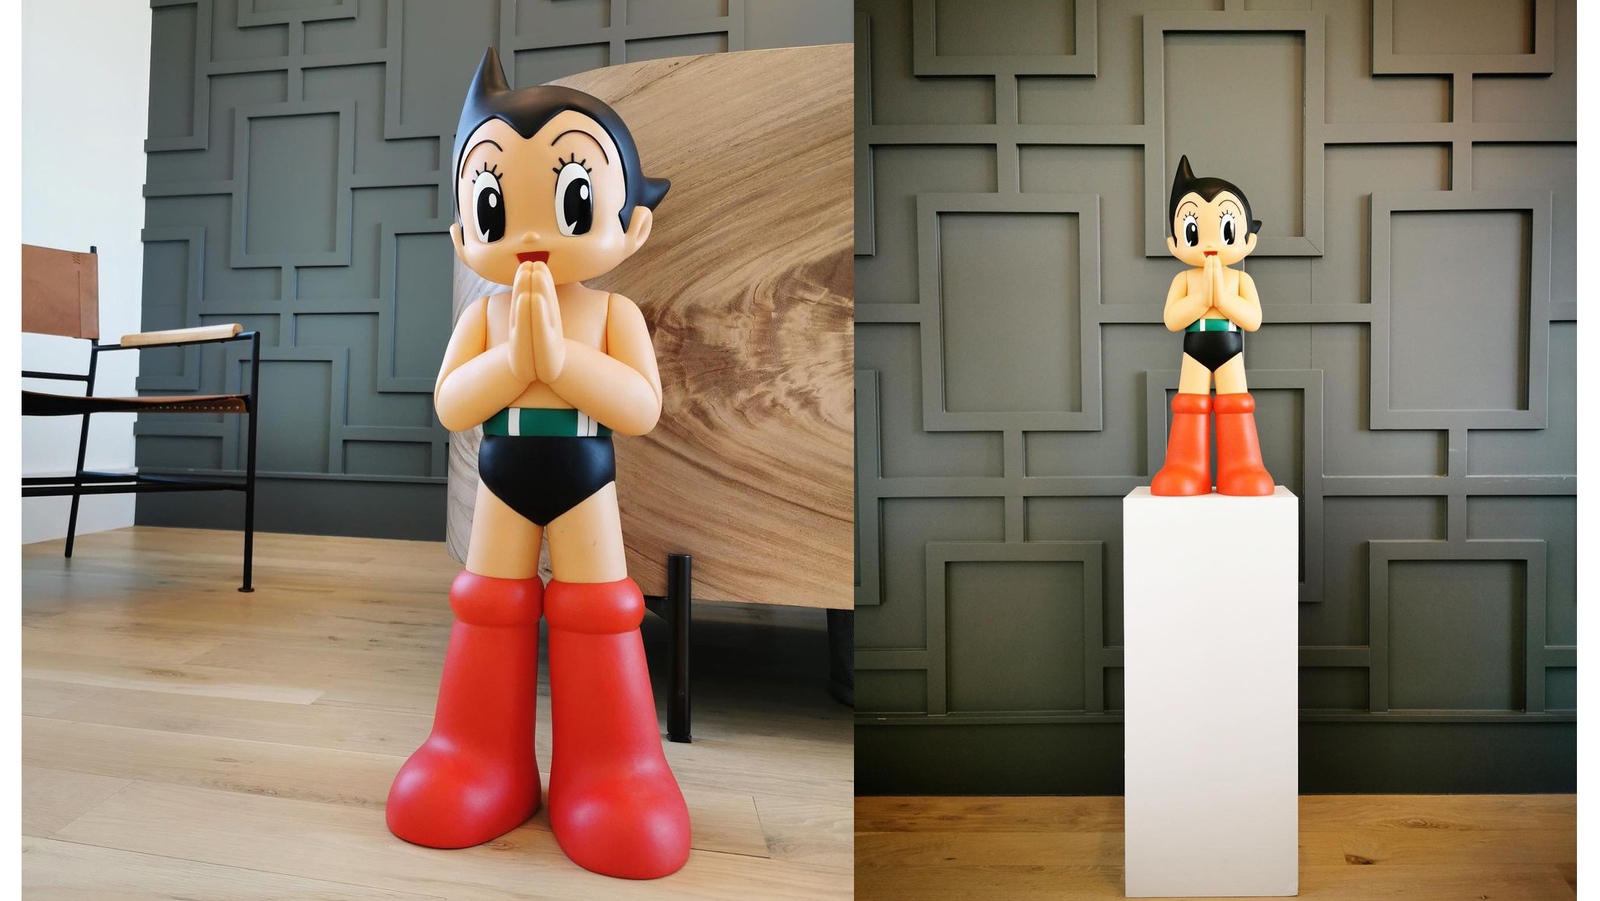 You are currently viewing 1000% Astro Boy Greeting by ToyQube